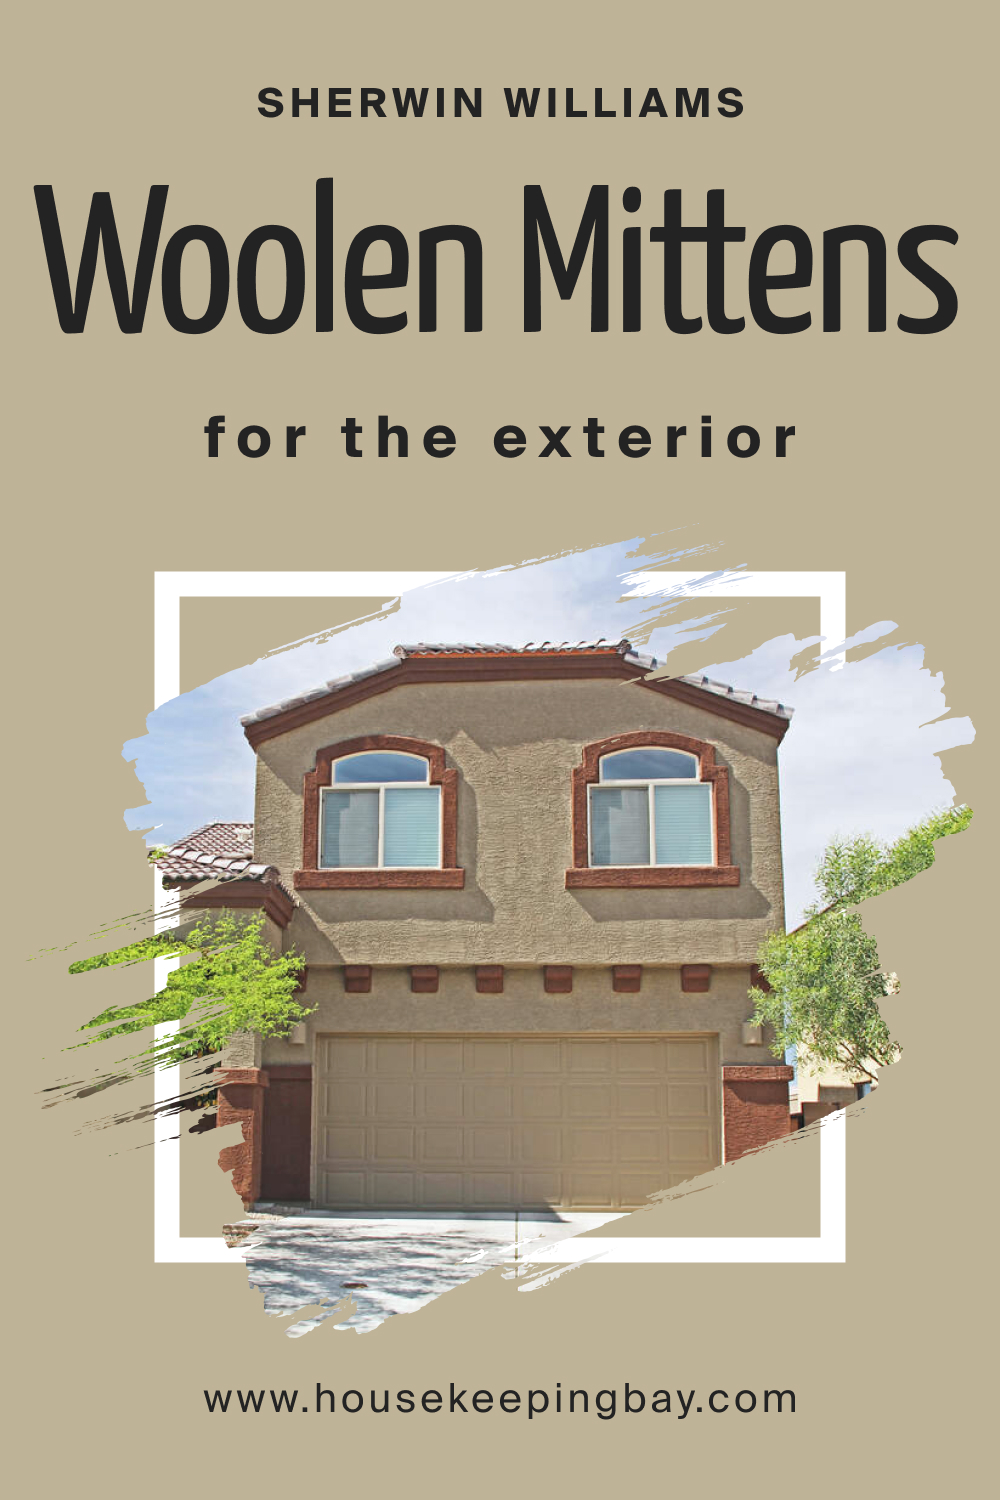 Sherwin Williams. SW 9526 Woolen Mittens For the exterior